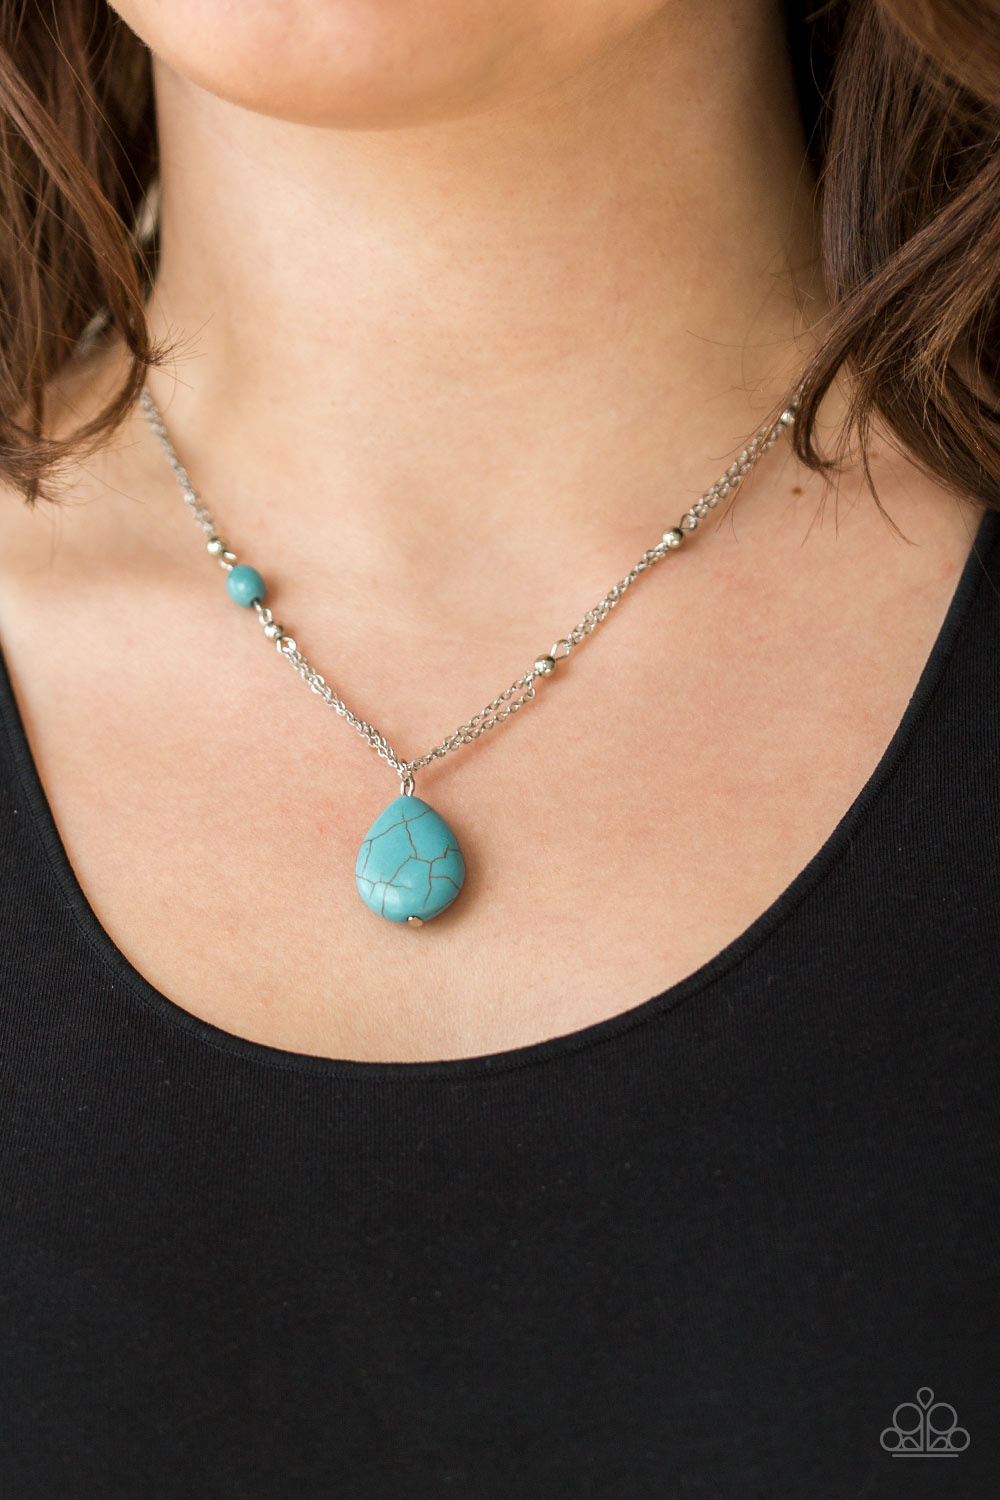 Peaceful Prairies Blue Turquoise Necklace